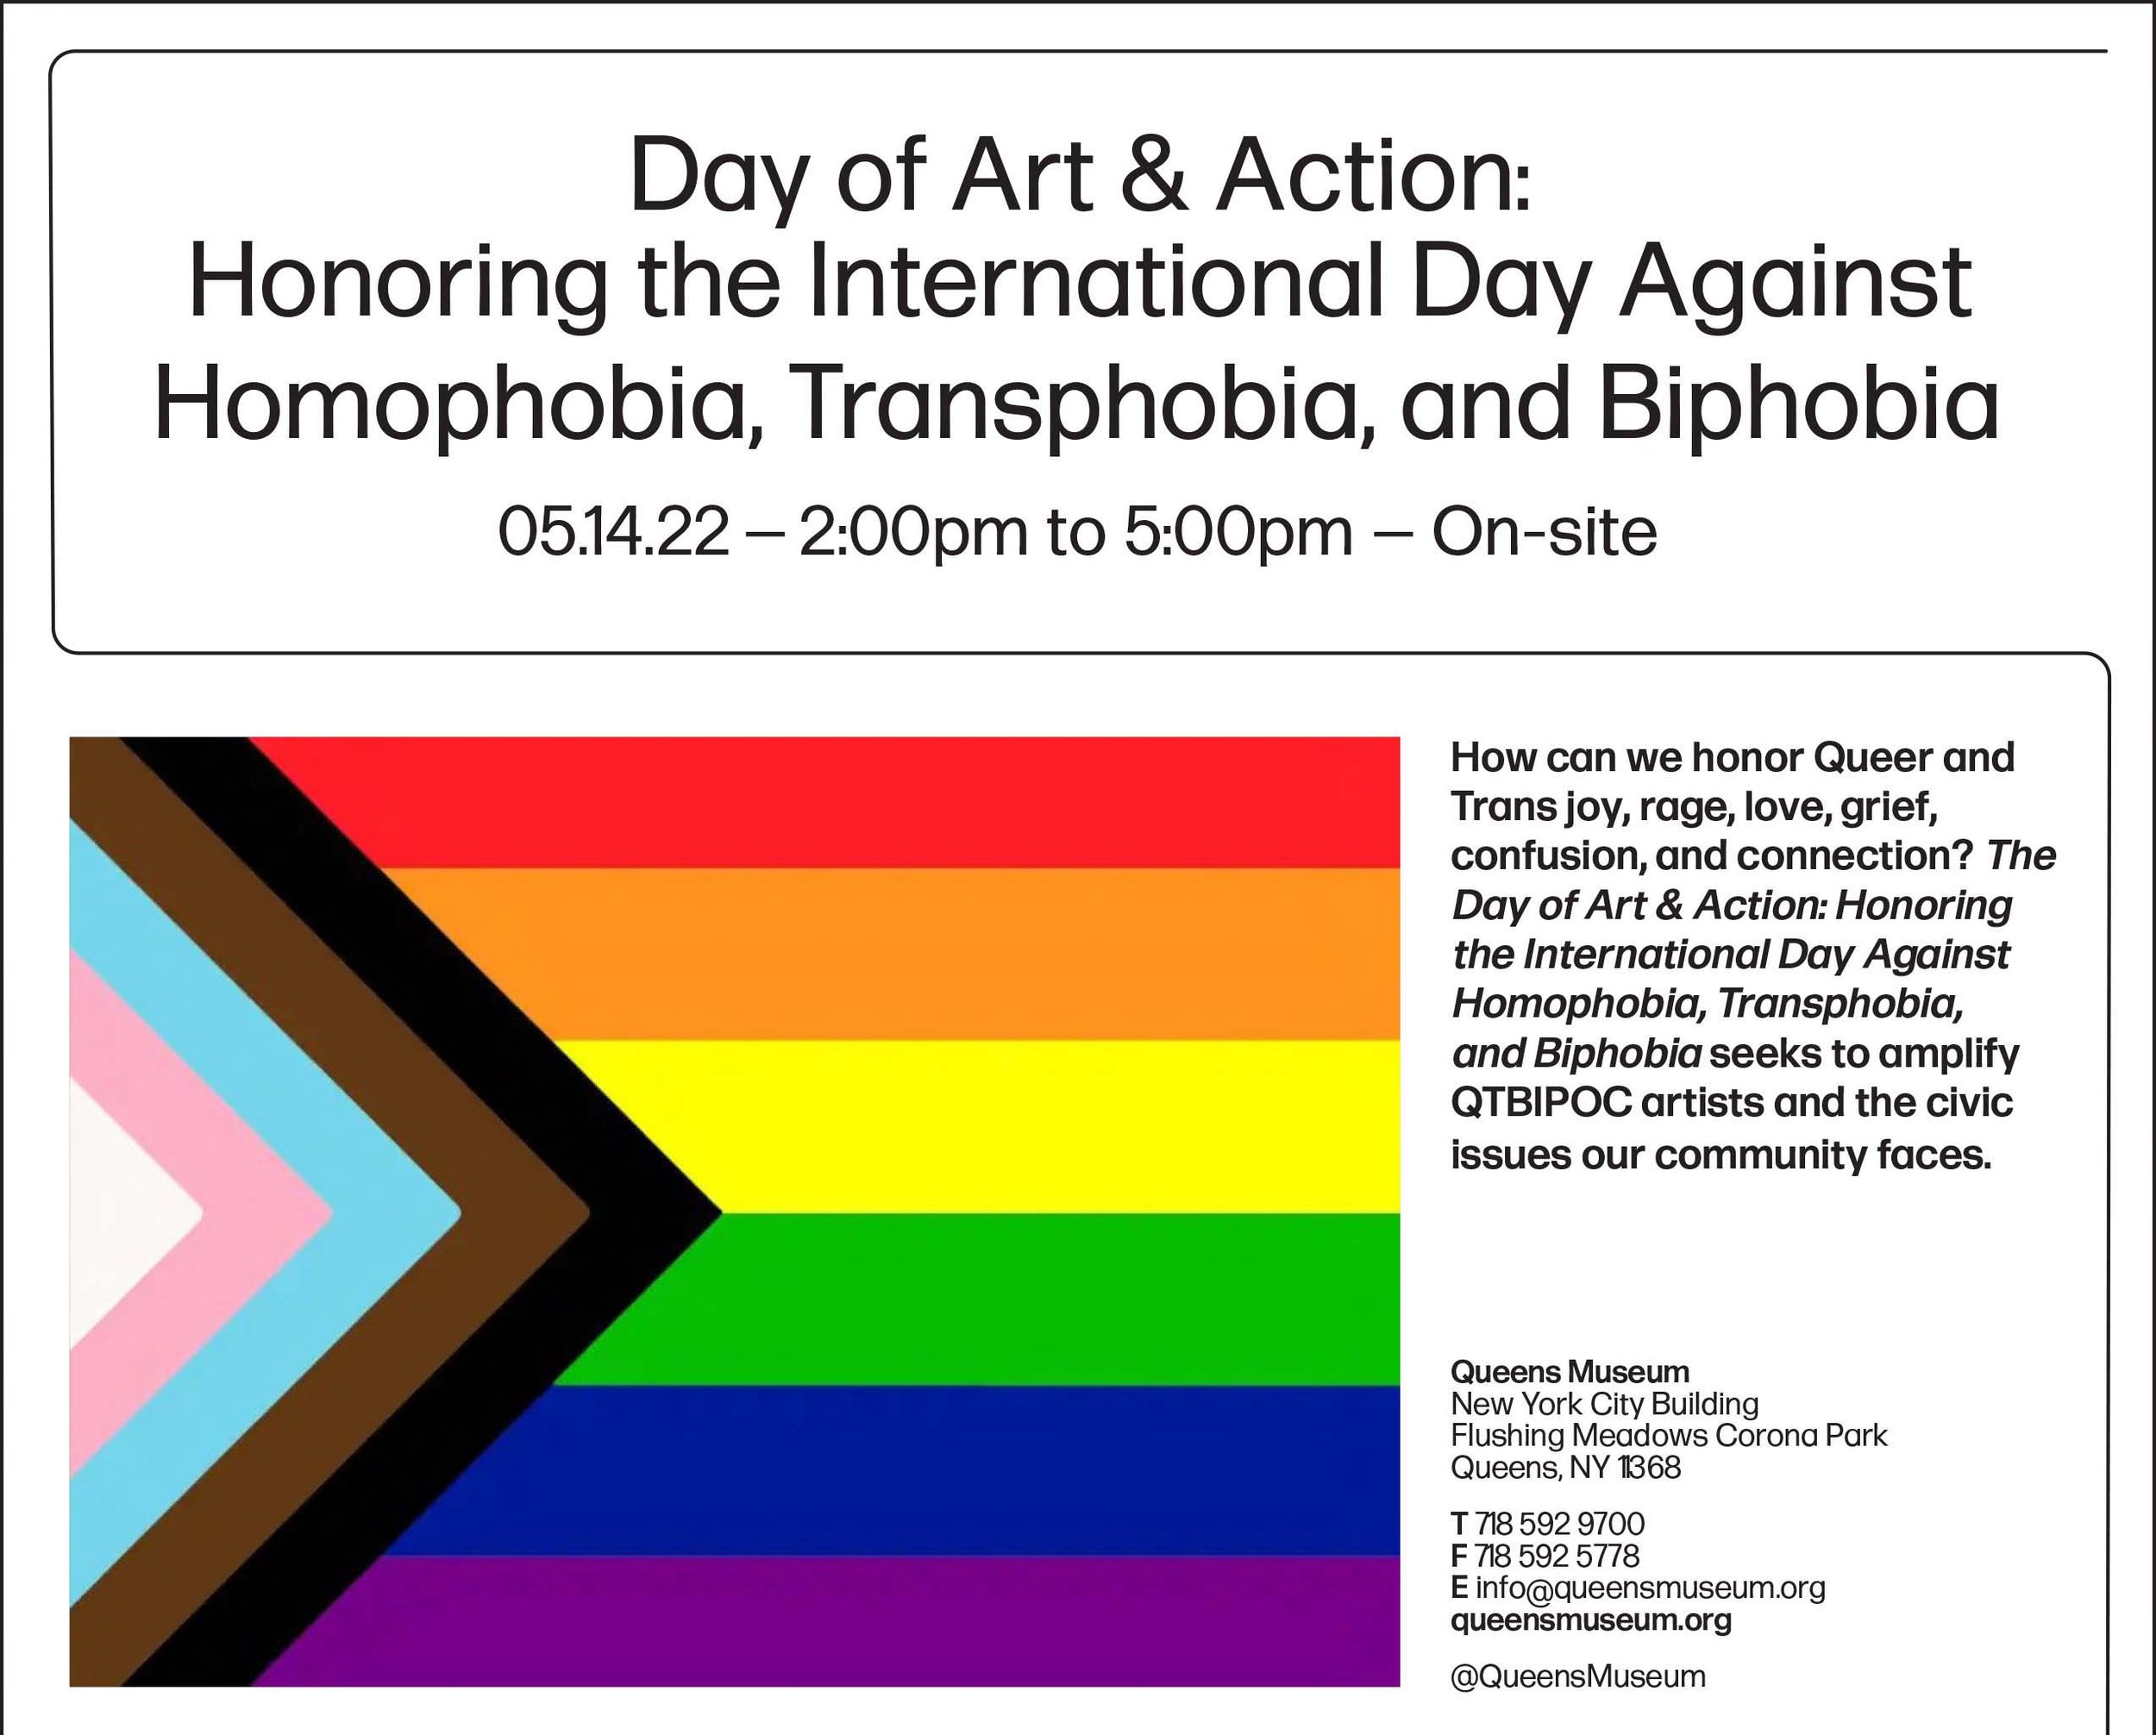 Day of Art &amp; Action: Honoring the International Day Against Homophobia, Transphobia, and Biphobia